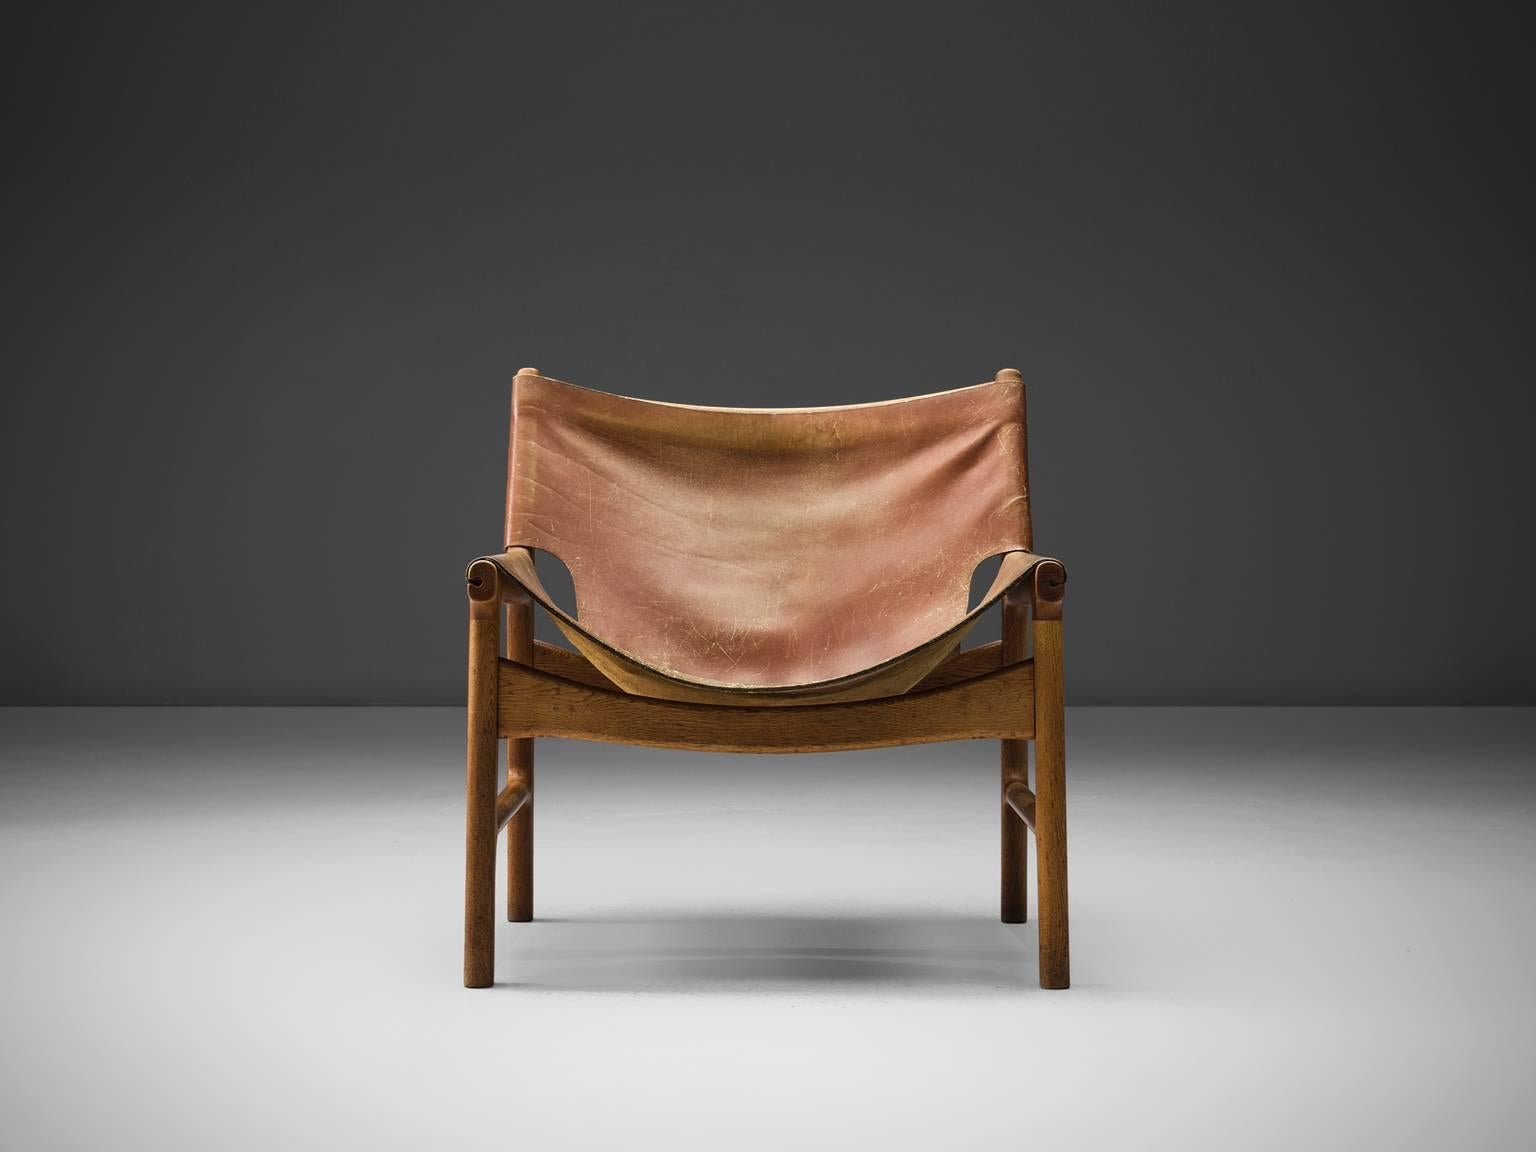 Illum Wikkelsø for Mikael Laursen, easy chair model 103, leather and oak, Denmark, 1960s.

This easy chair is a design by Illum Wikkelsø but produced by master-carver and cabinetmaker Mikael Laursen. The leather is attached to the frame of the chair